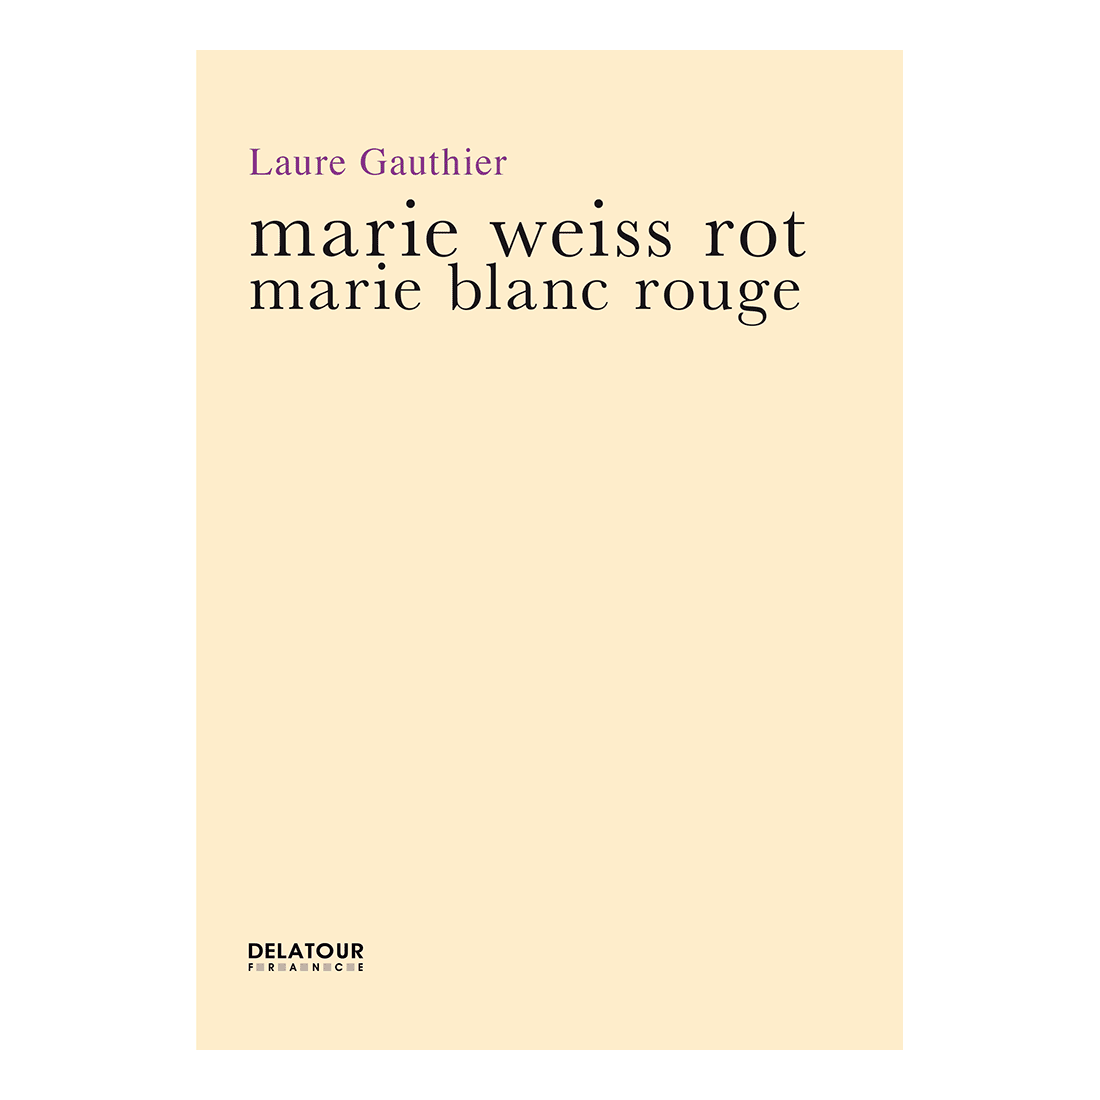 Marie blanc rouge - Marie weiss rot (Bilingual edition)